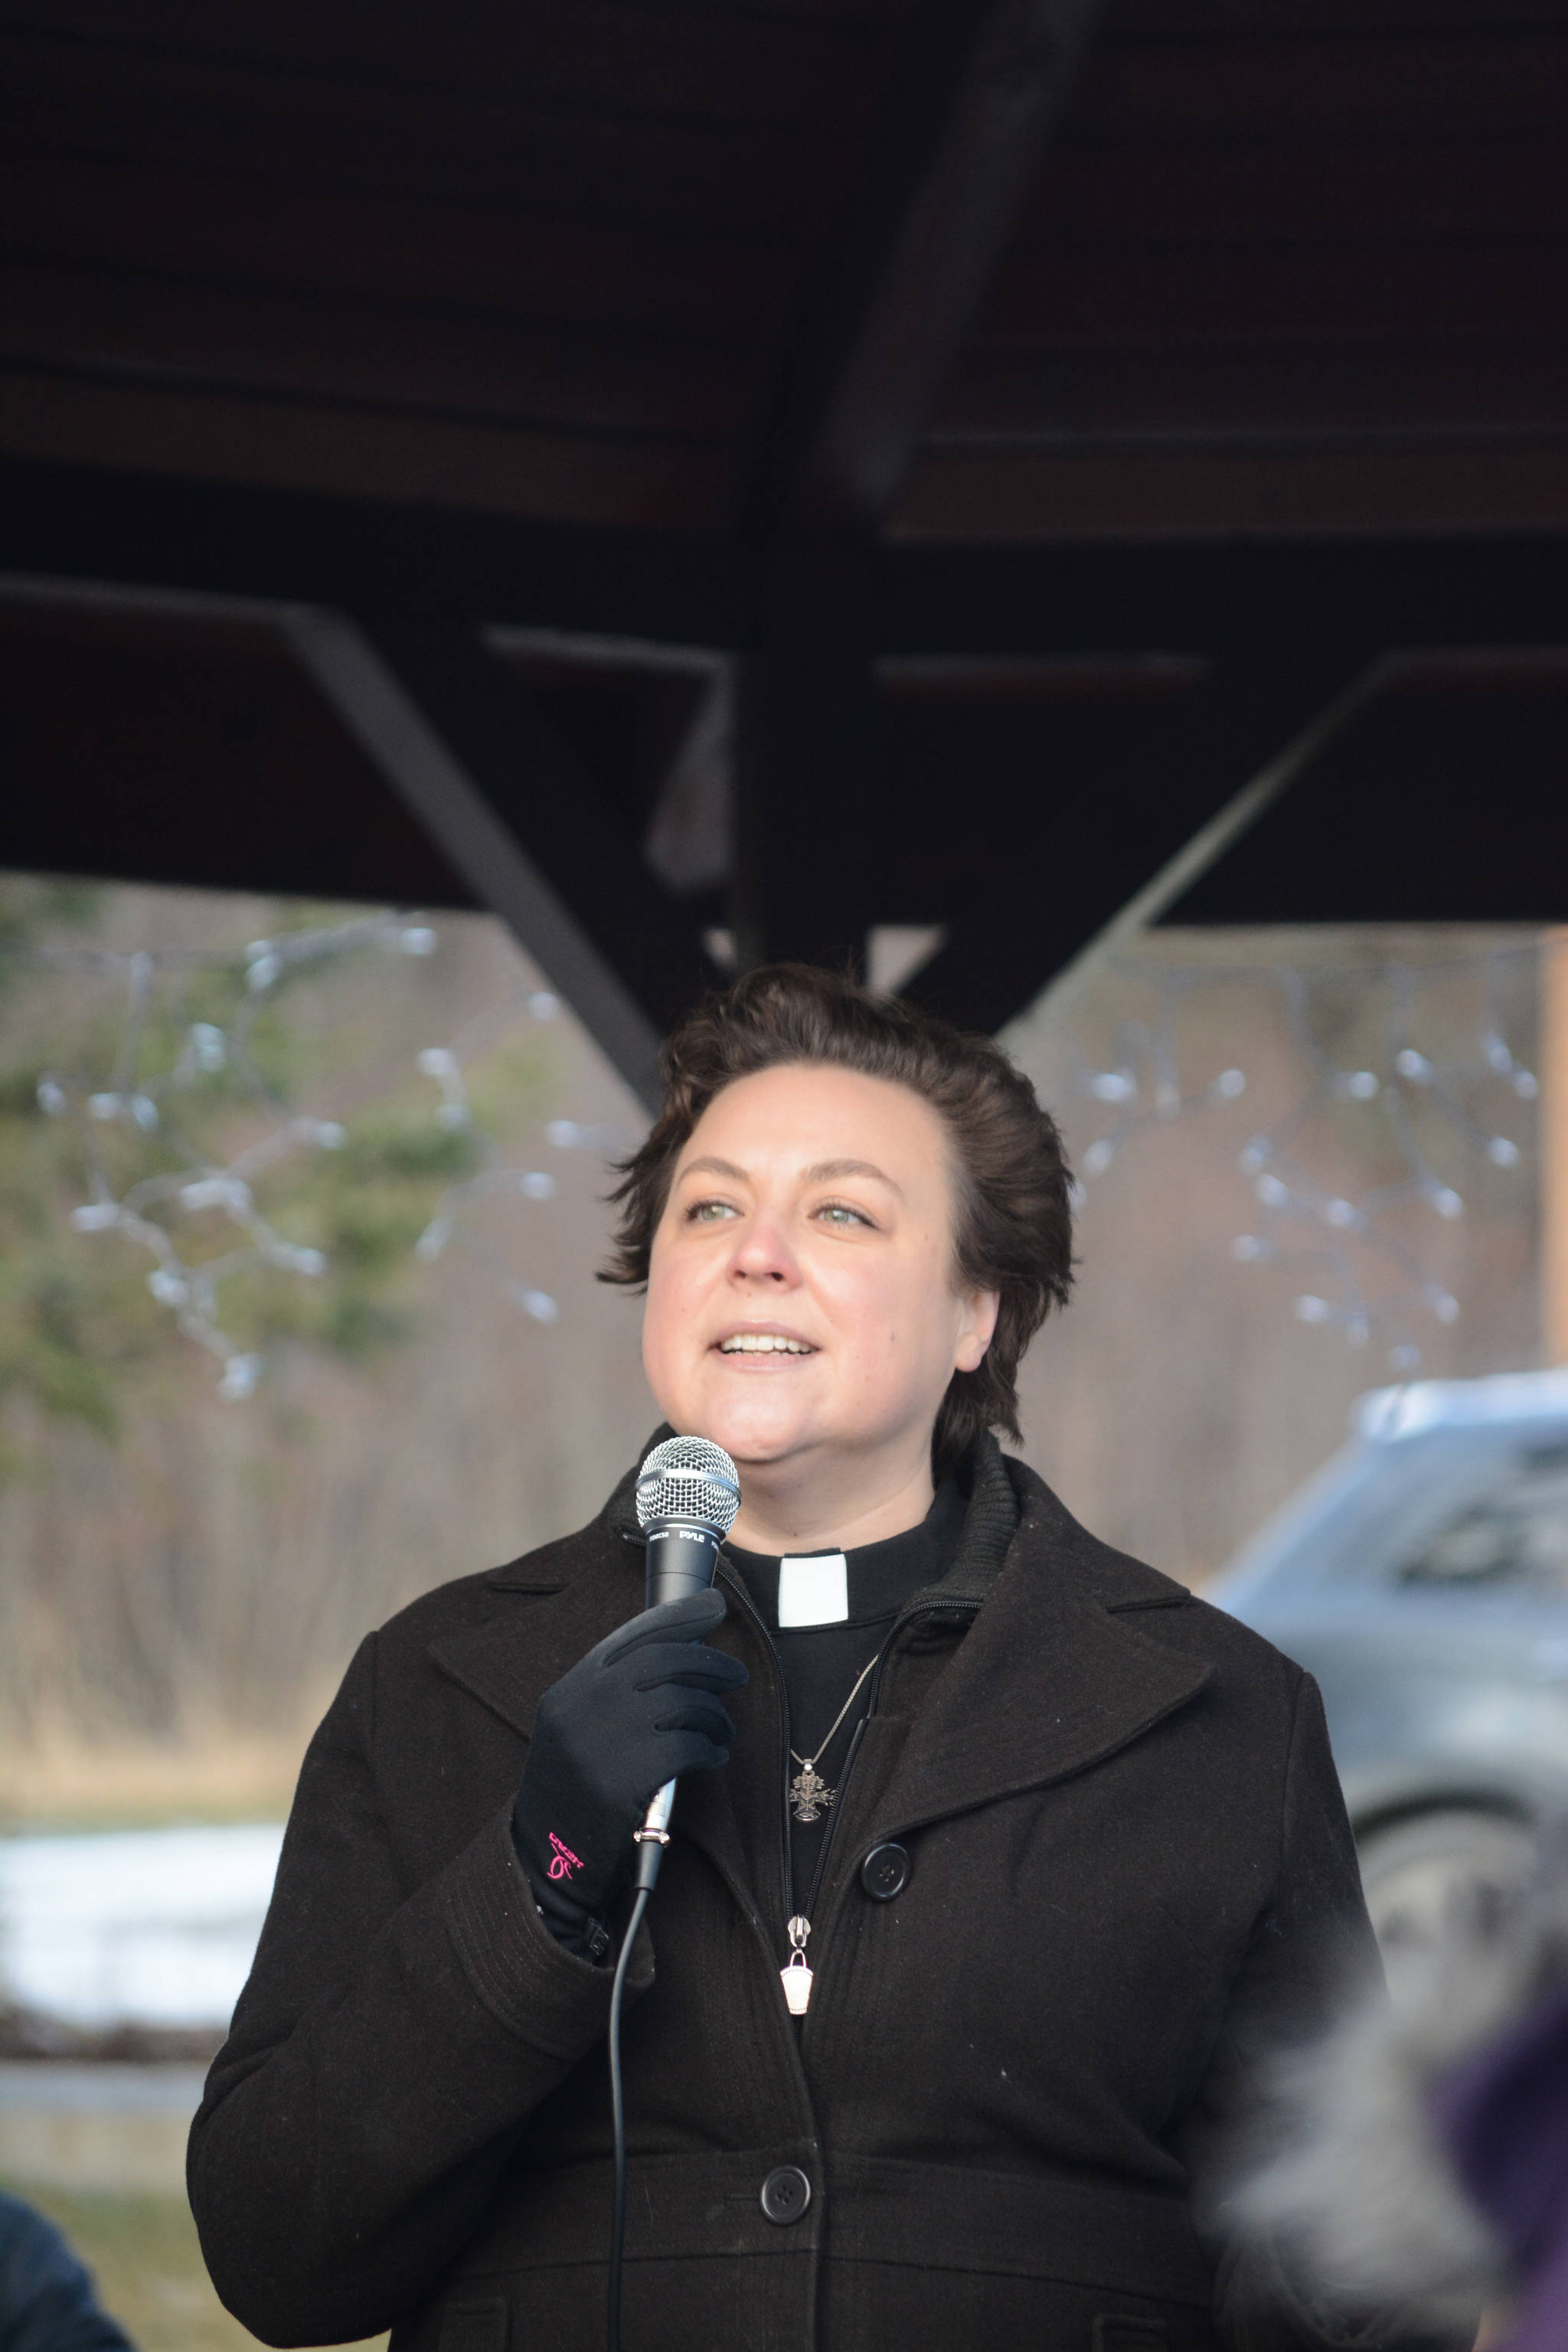 Pastor Lisa Talbott of Homer United Methodist Church speaks at the Homer March for Women on Saturday. Talbott held up a sign that read “#MeToo” and spoke about her experiences with sexual harassment and how she overcame them. “Nevertheless, she persisted,” Talbott said. “My life story is a story of persistence. Just like you I had a life story.” Talbott said she believes in the abundant life promised by Jesus Christ. “The abundant life is not about fighting. It’s about thriving,” she said. About 700 people walked in the march along Pioneer Avenue on Jan. 20, 2018, in Homer, Alaska. The line of marchers extended from Main Street to Kachemak Way. (Photo by Michael Armstrong/Homer News)